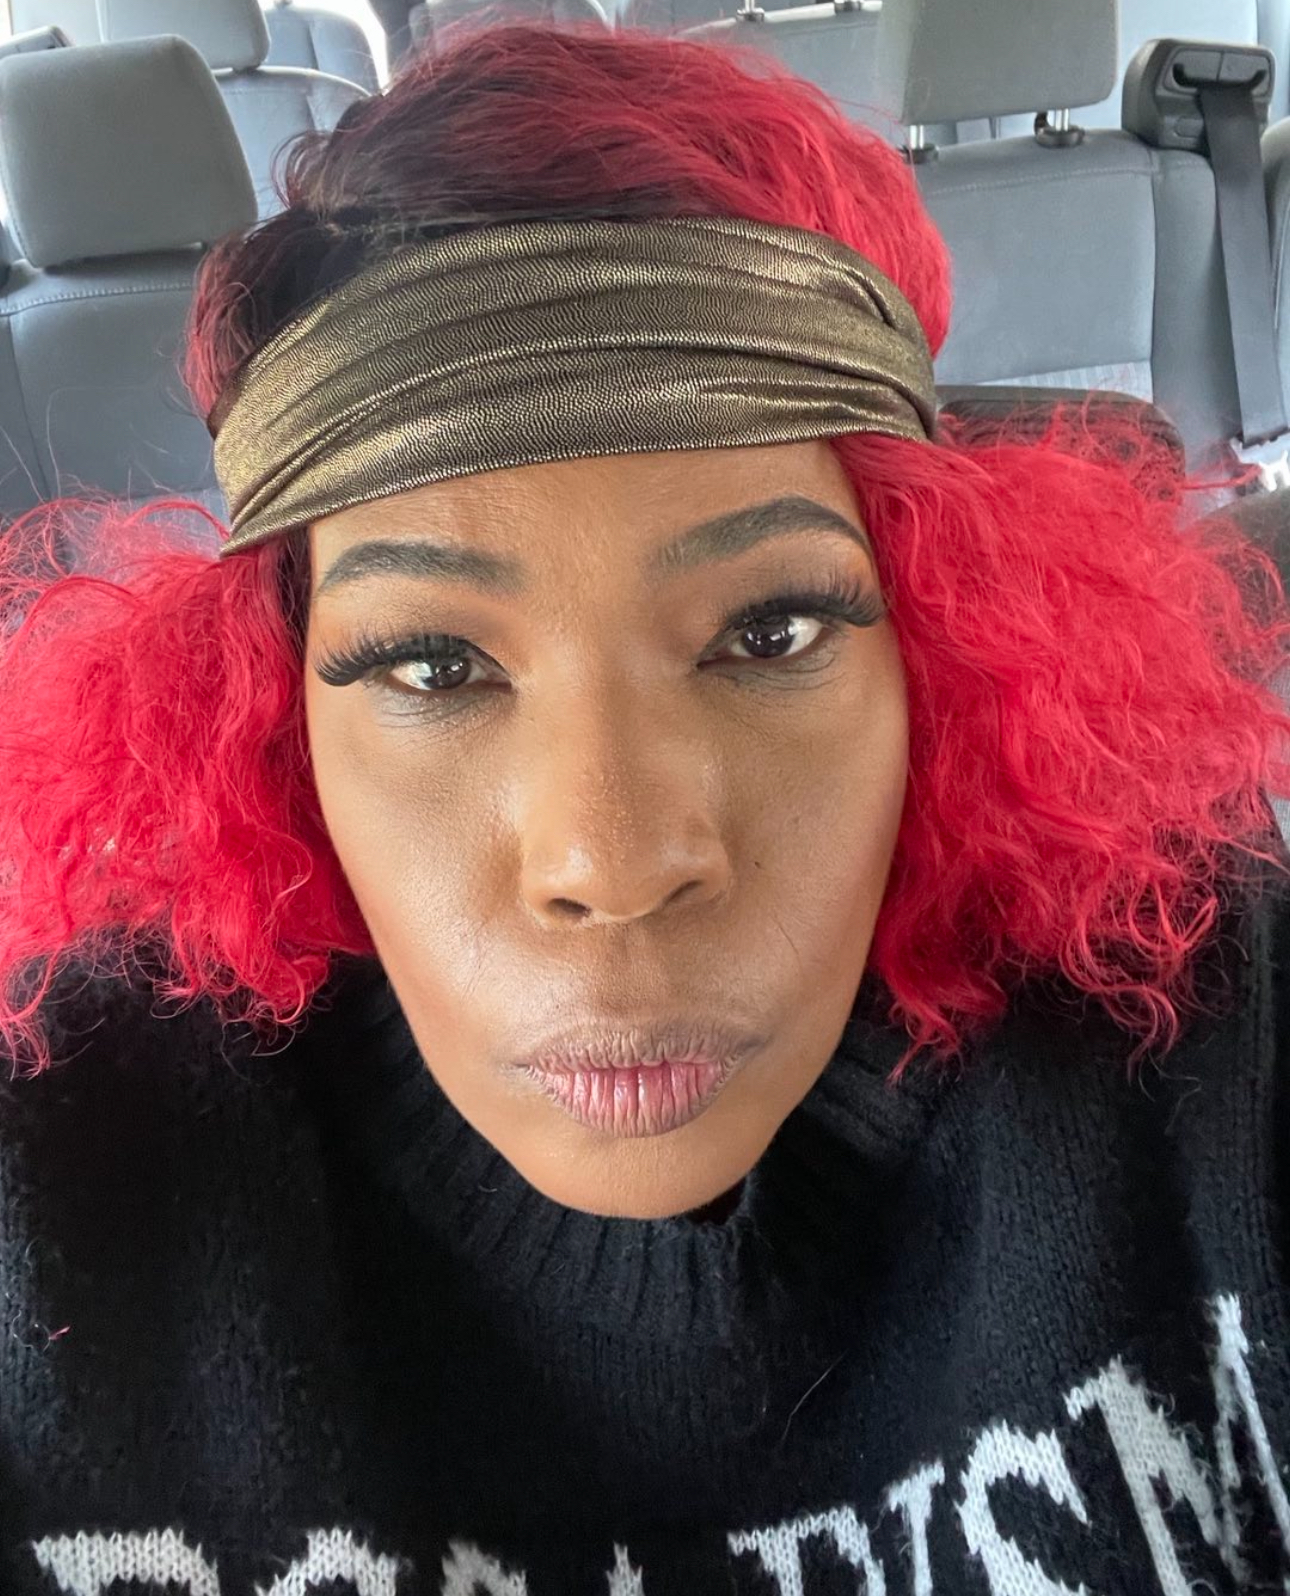 Macy Gray's daughter, Aanisah Hinds, has sought legal protection against her brother, Tracy Melvin Hinds, accusing him of recurring abusive behavior while under the influence of alcohol.